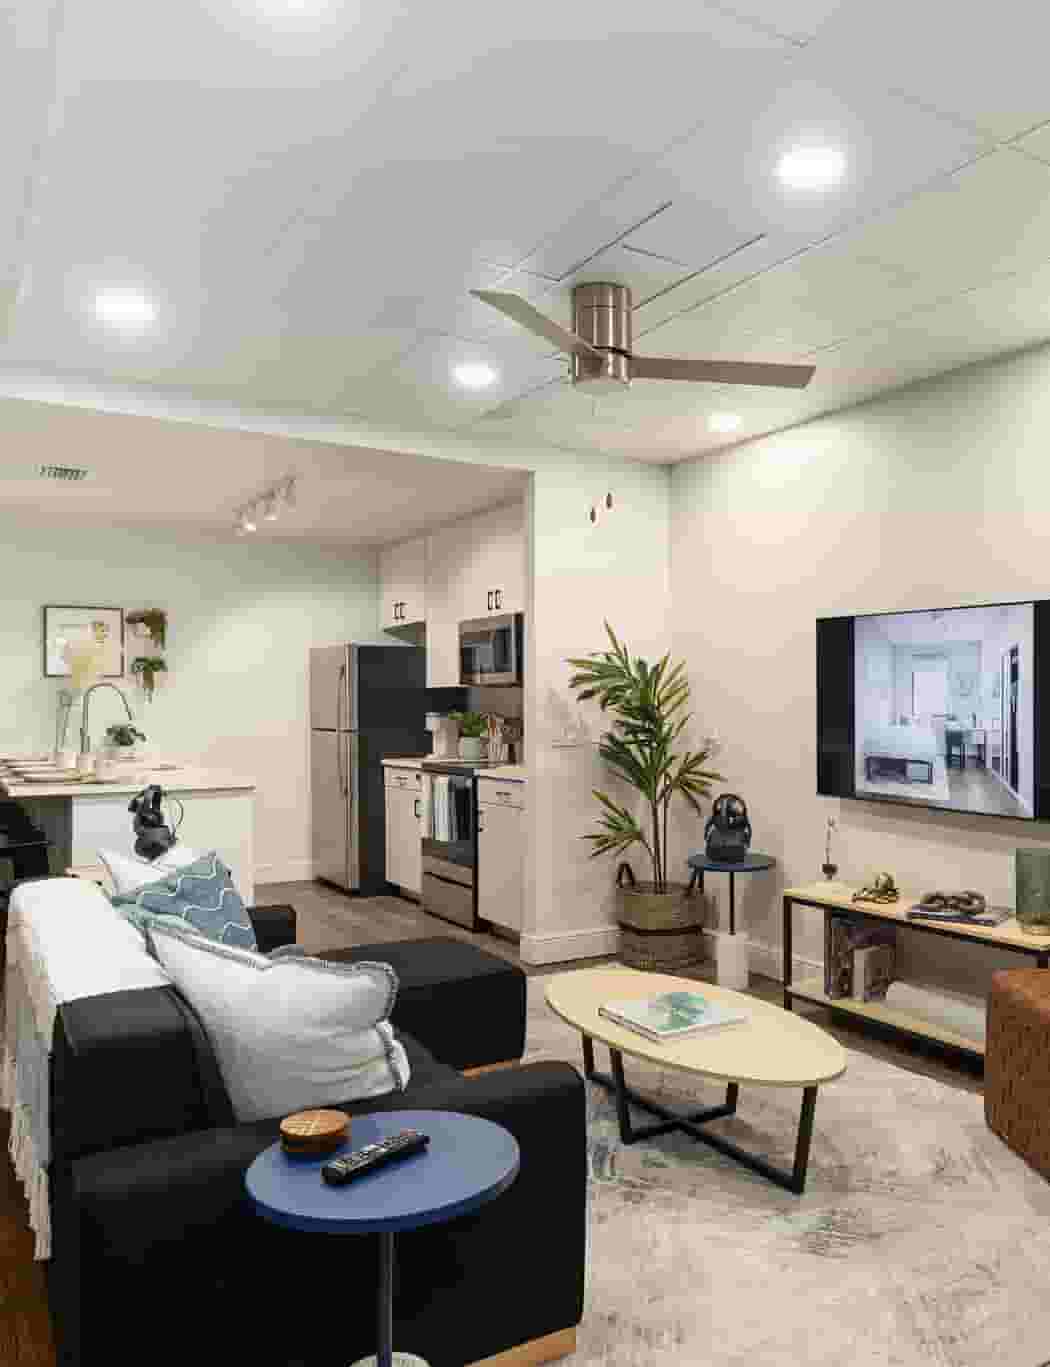 Modern, fully-furnished student apartments